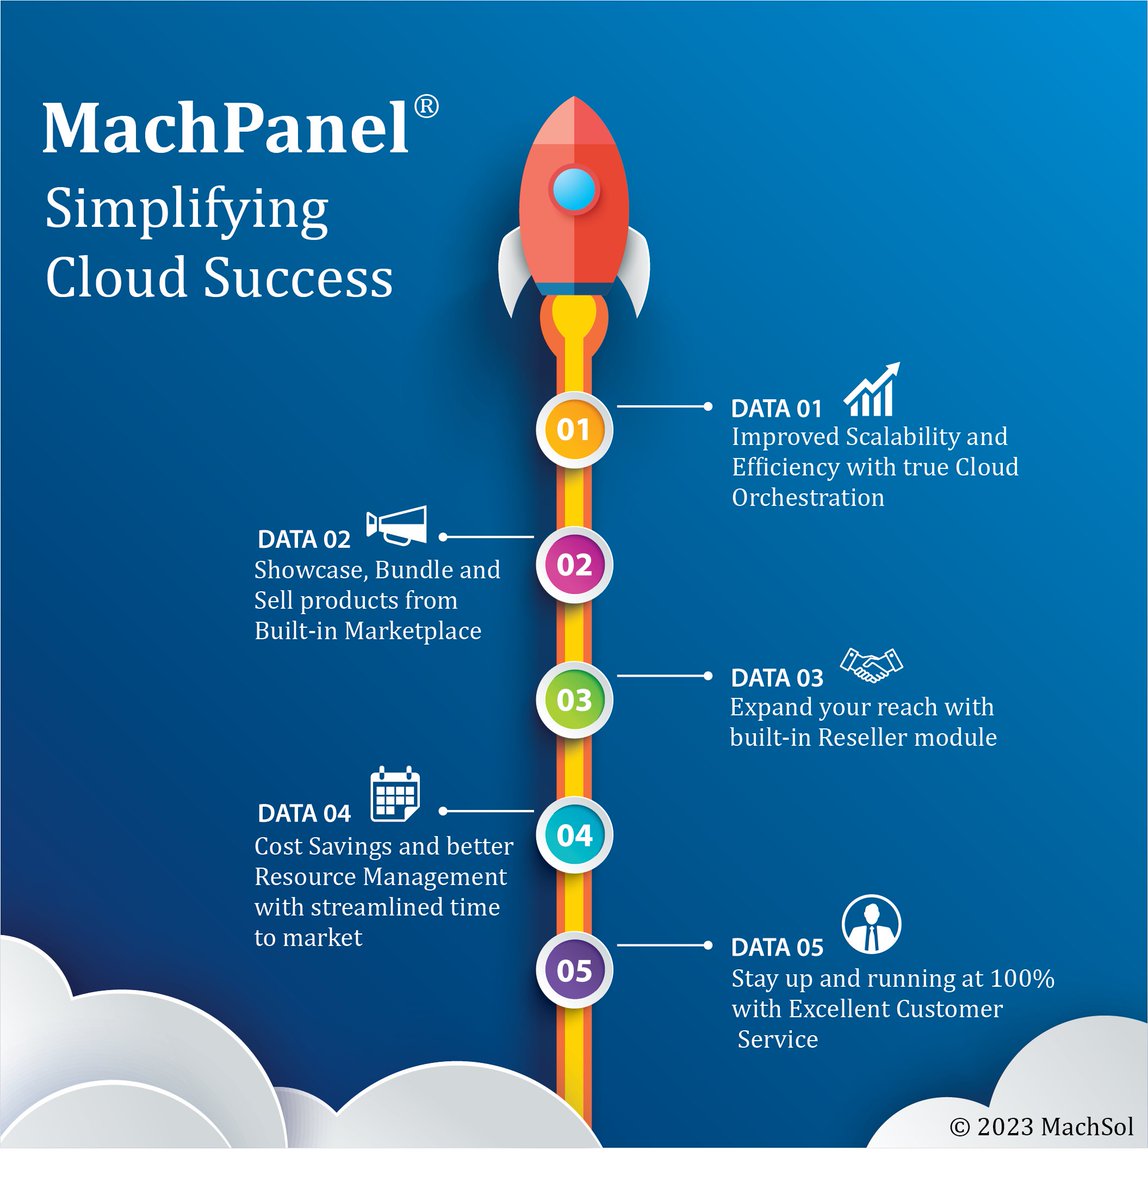 Simplify your Journey to Cloud success with #MachPanel, #MultiCloud #Orchestration and #Management Solution. Get started today with a #FreeTrial: view.ms/FreeTrial